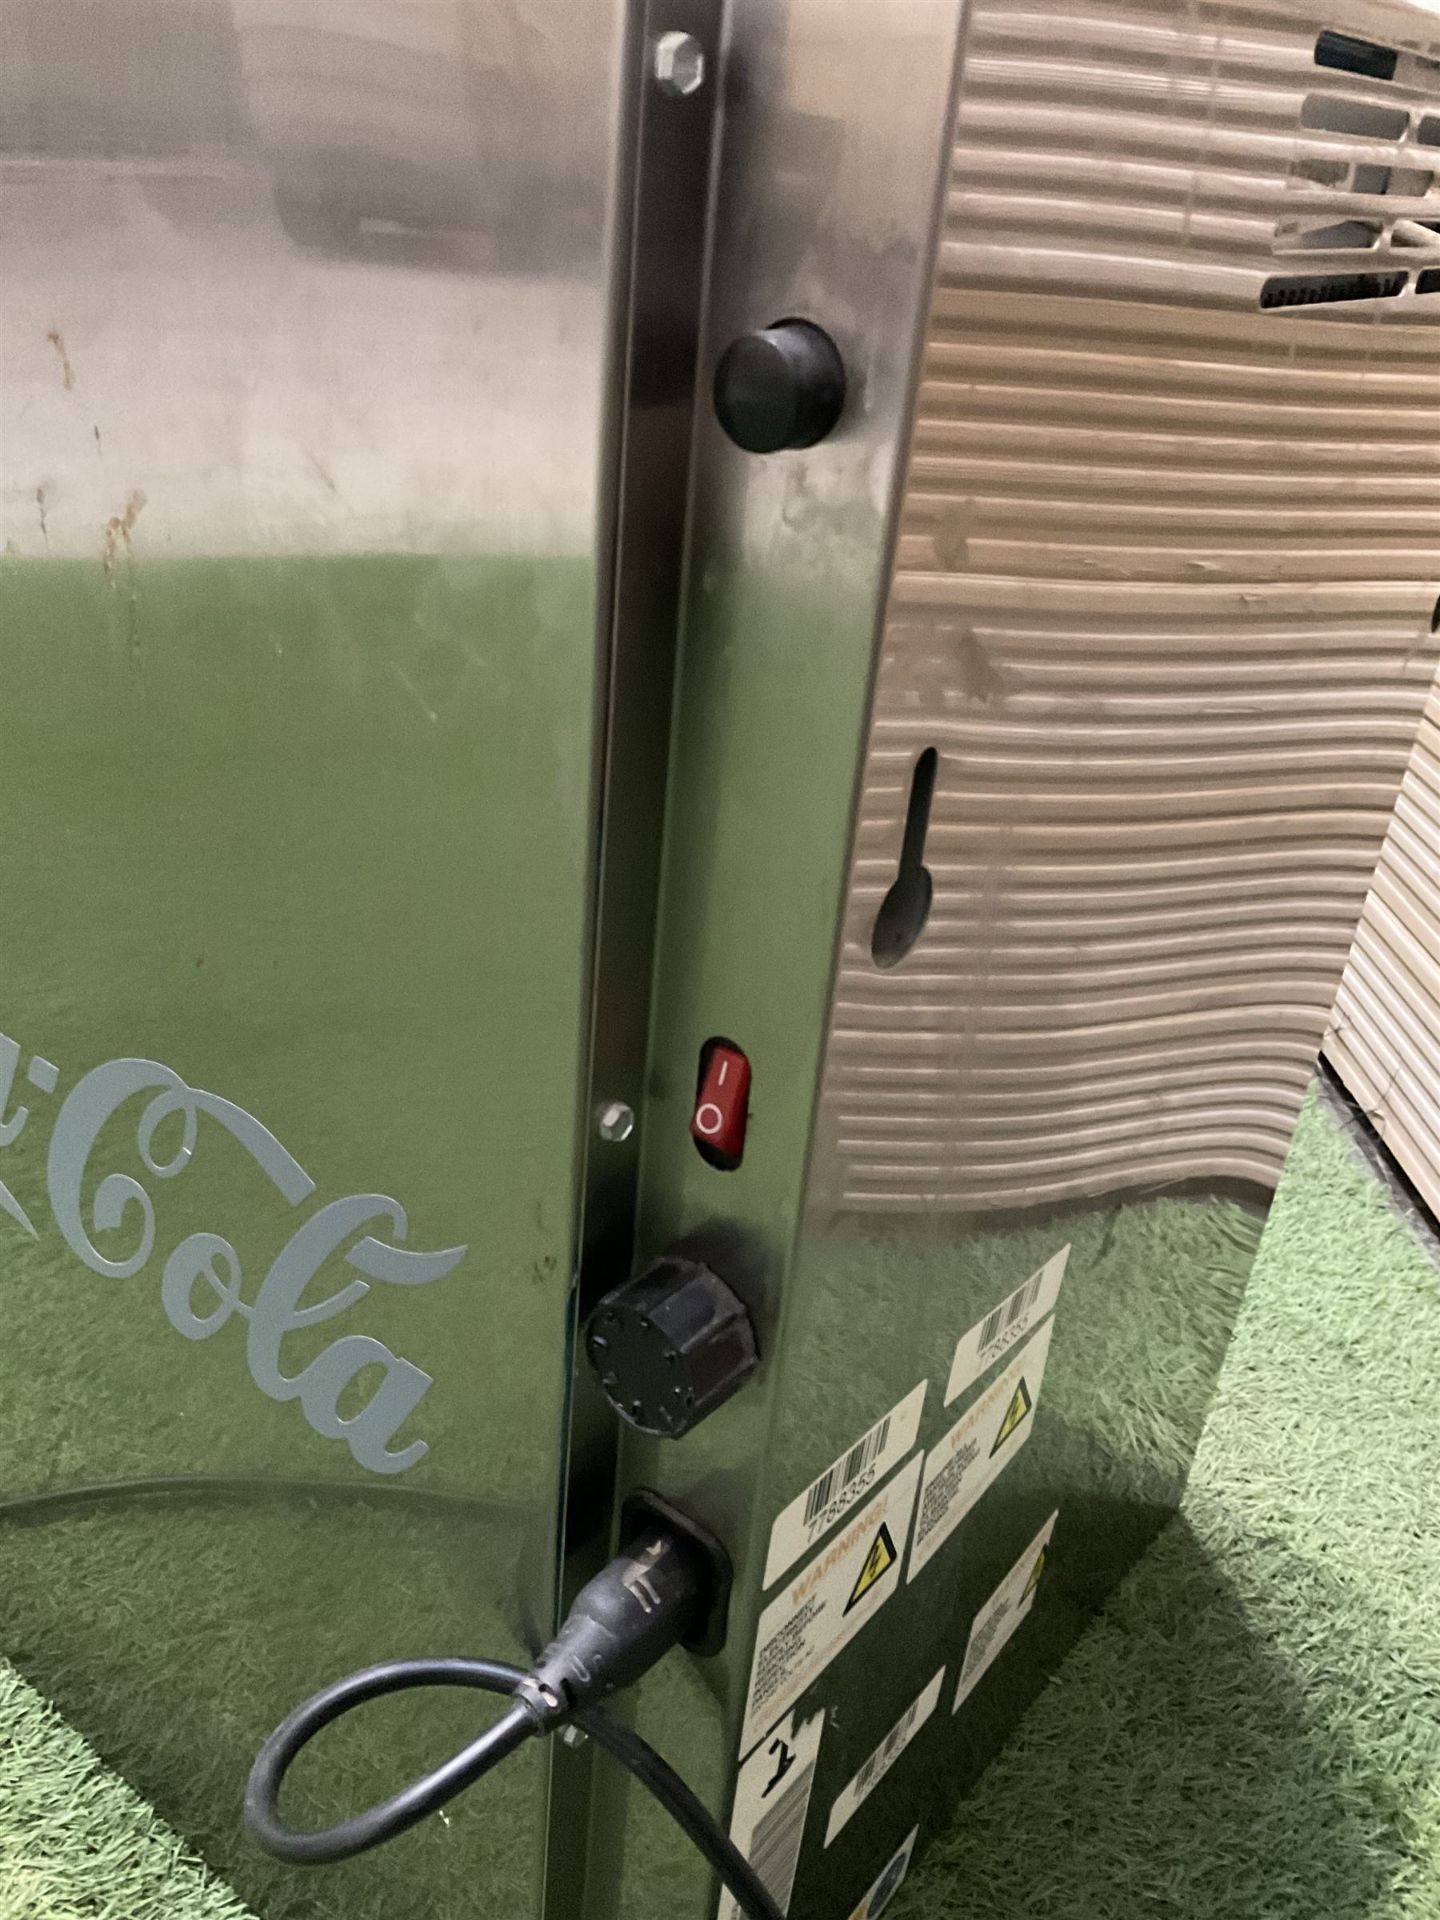 CocaCola stainless steel see trough mini fridge - THIS LOT IS TO BE COLLECTED BY APPOINTMENT FROM D - Image 8 of 8